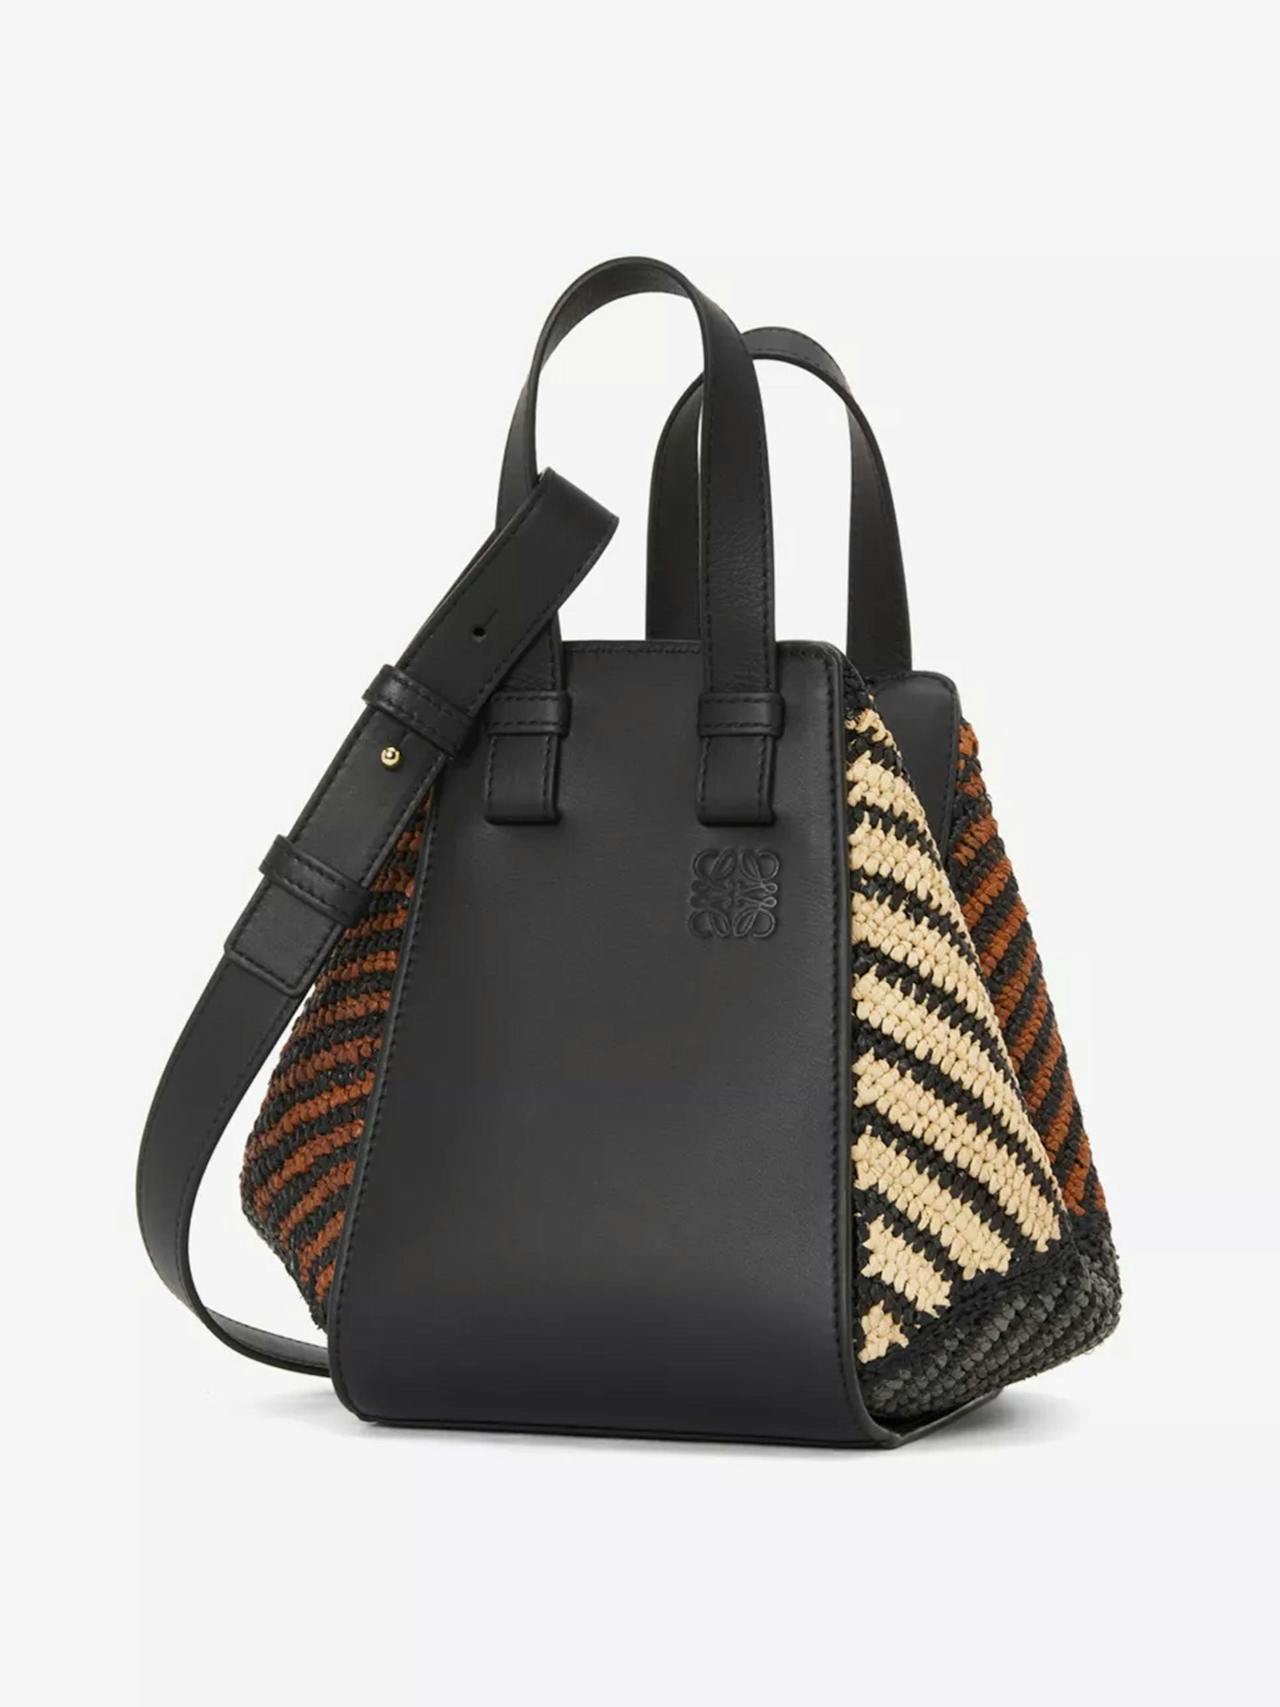 Hammock compact striped woven-raffia and leather shoulder bag